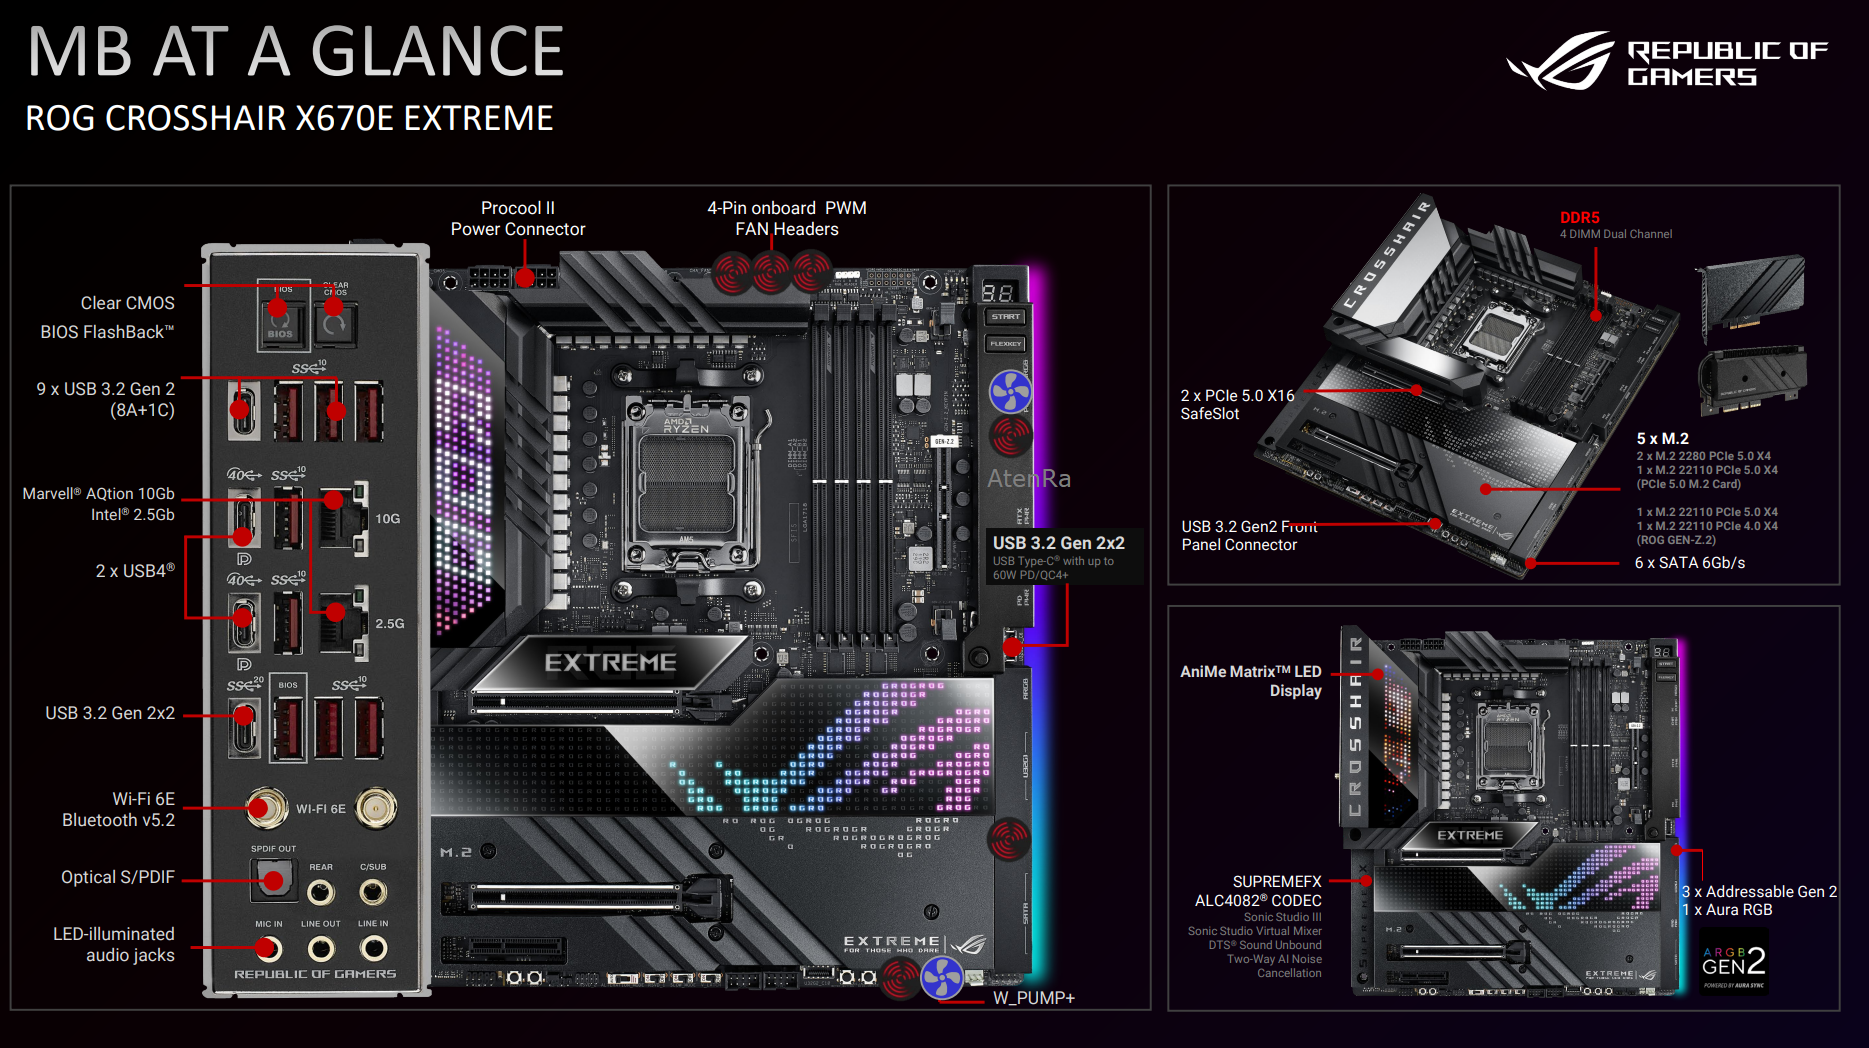 ASUS-ROG-Crosshair-X670-E-Extreme-1a.png